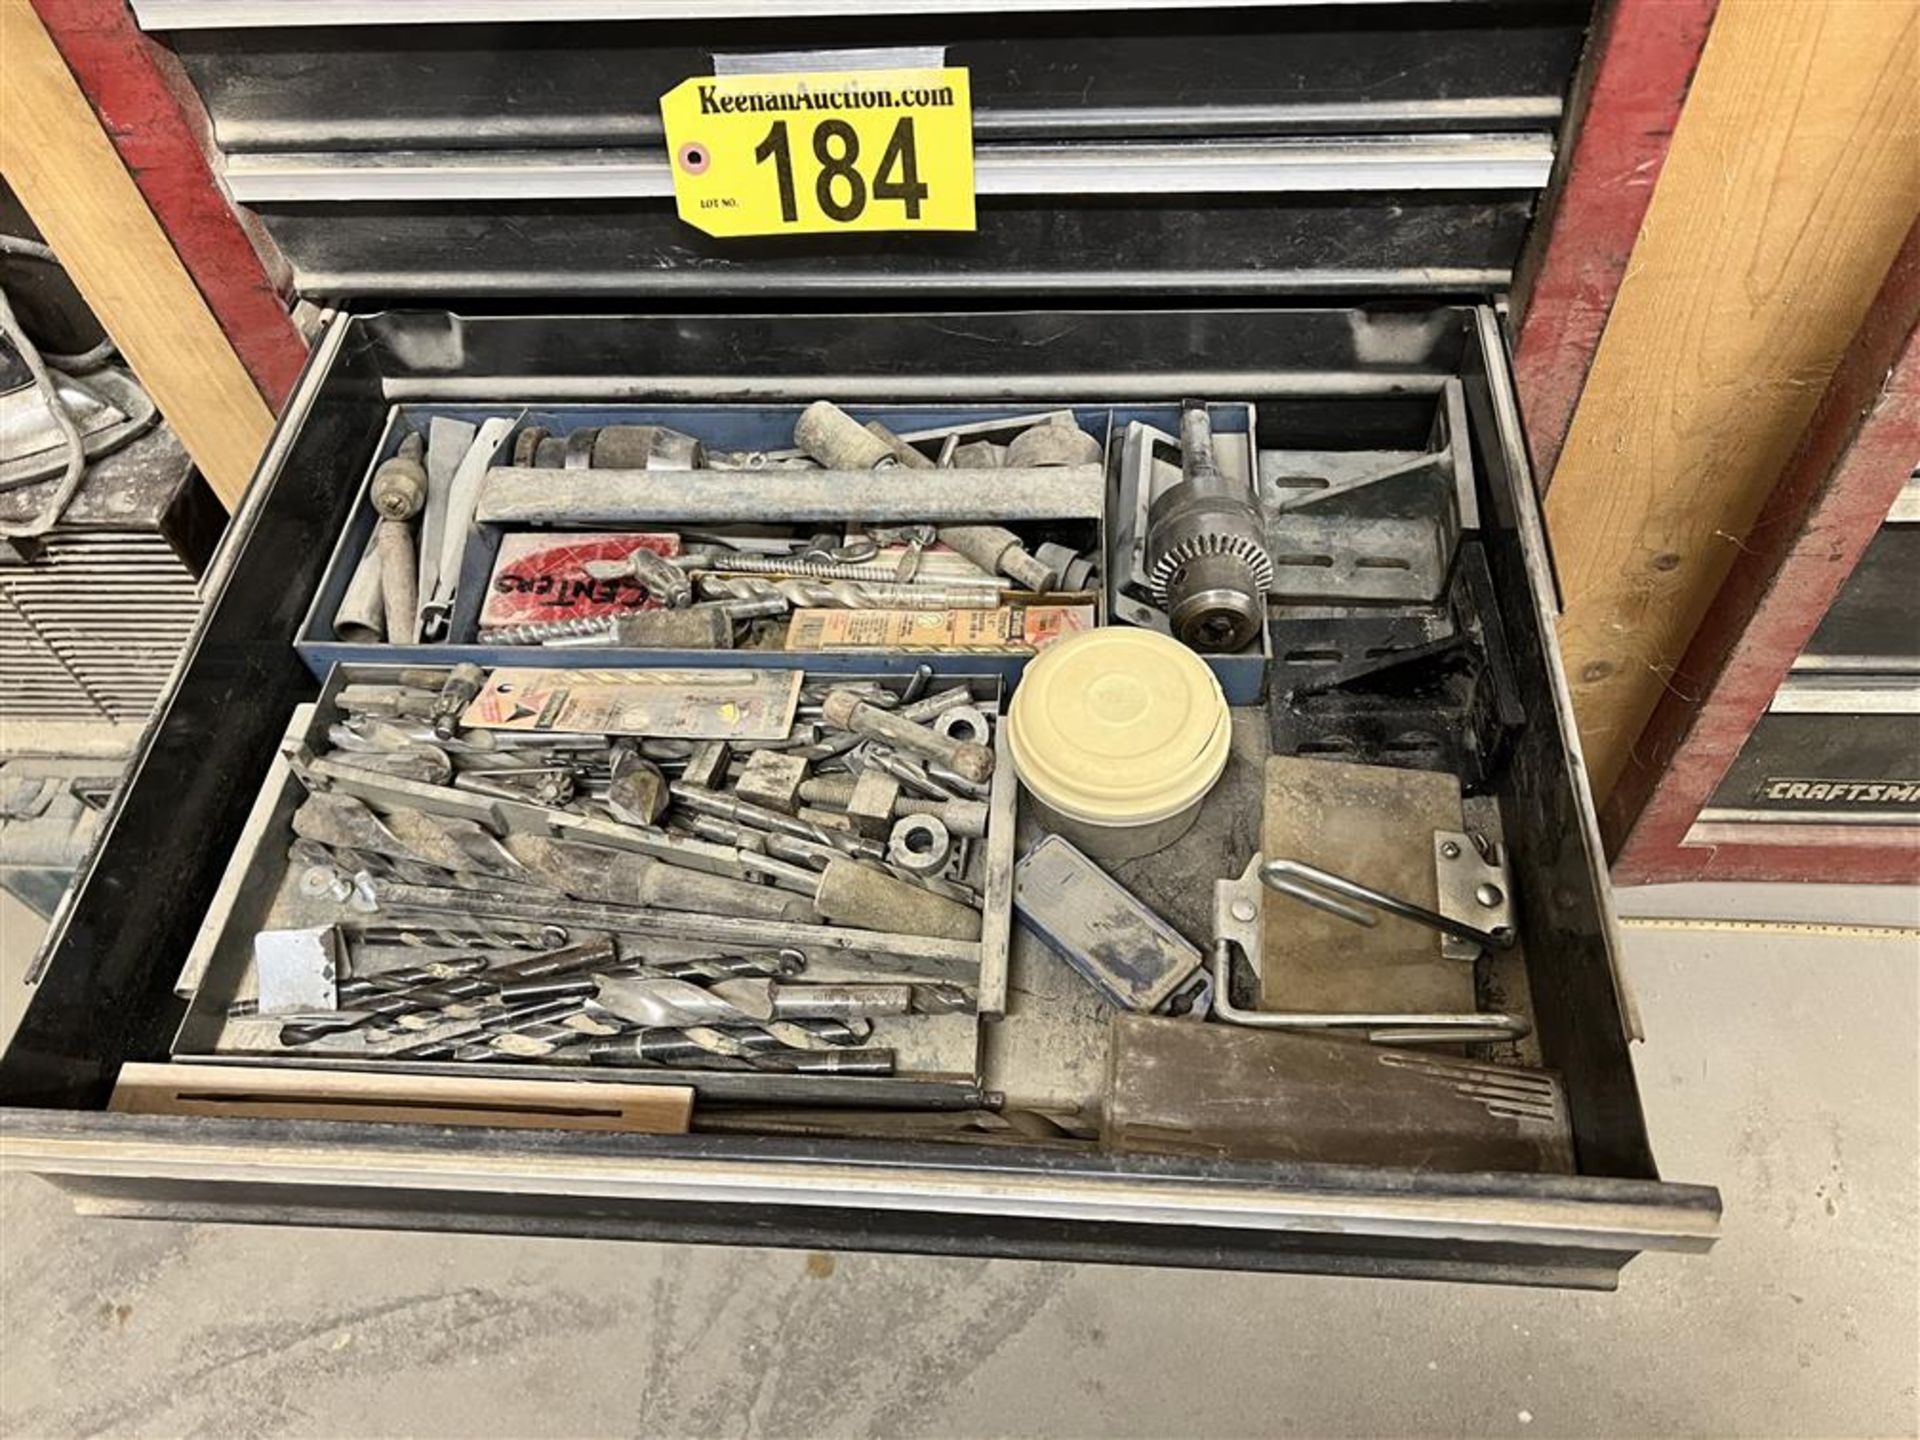 CONTENTS OF TOOL BOX: MISC. HAND TOOLS, SAW BLADES, BITS, FASTENERS, WOODWORKING HARDWARE - Image 2 of 3